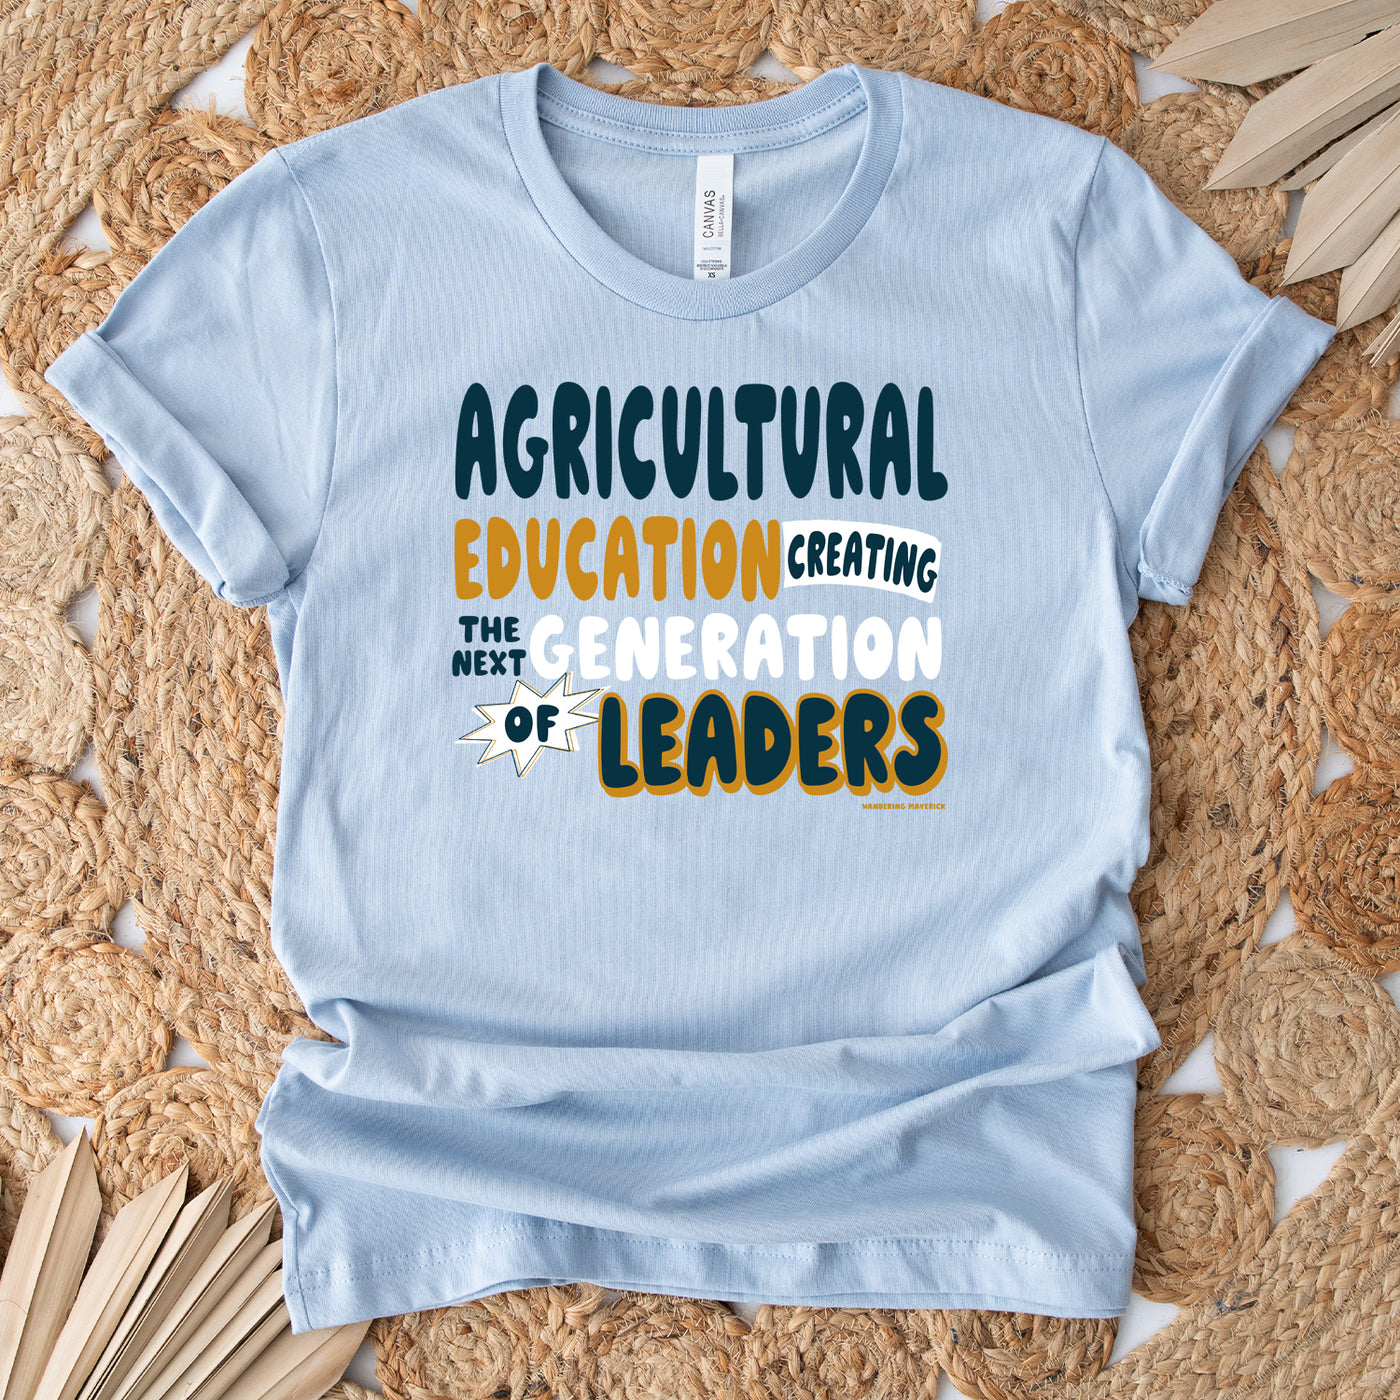 Agricultural Education - Creating The Next Generation Of Leaders T-Shirt (XS-4XL) - Multiple Colors!